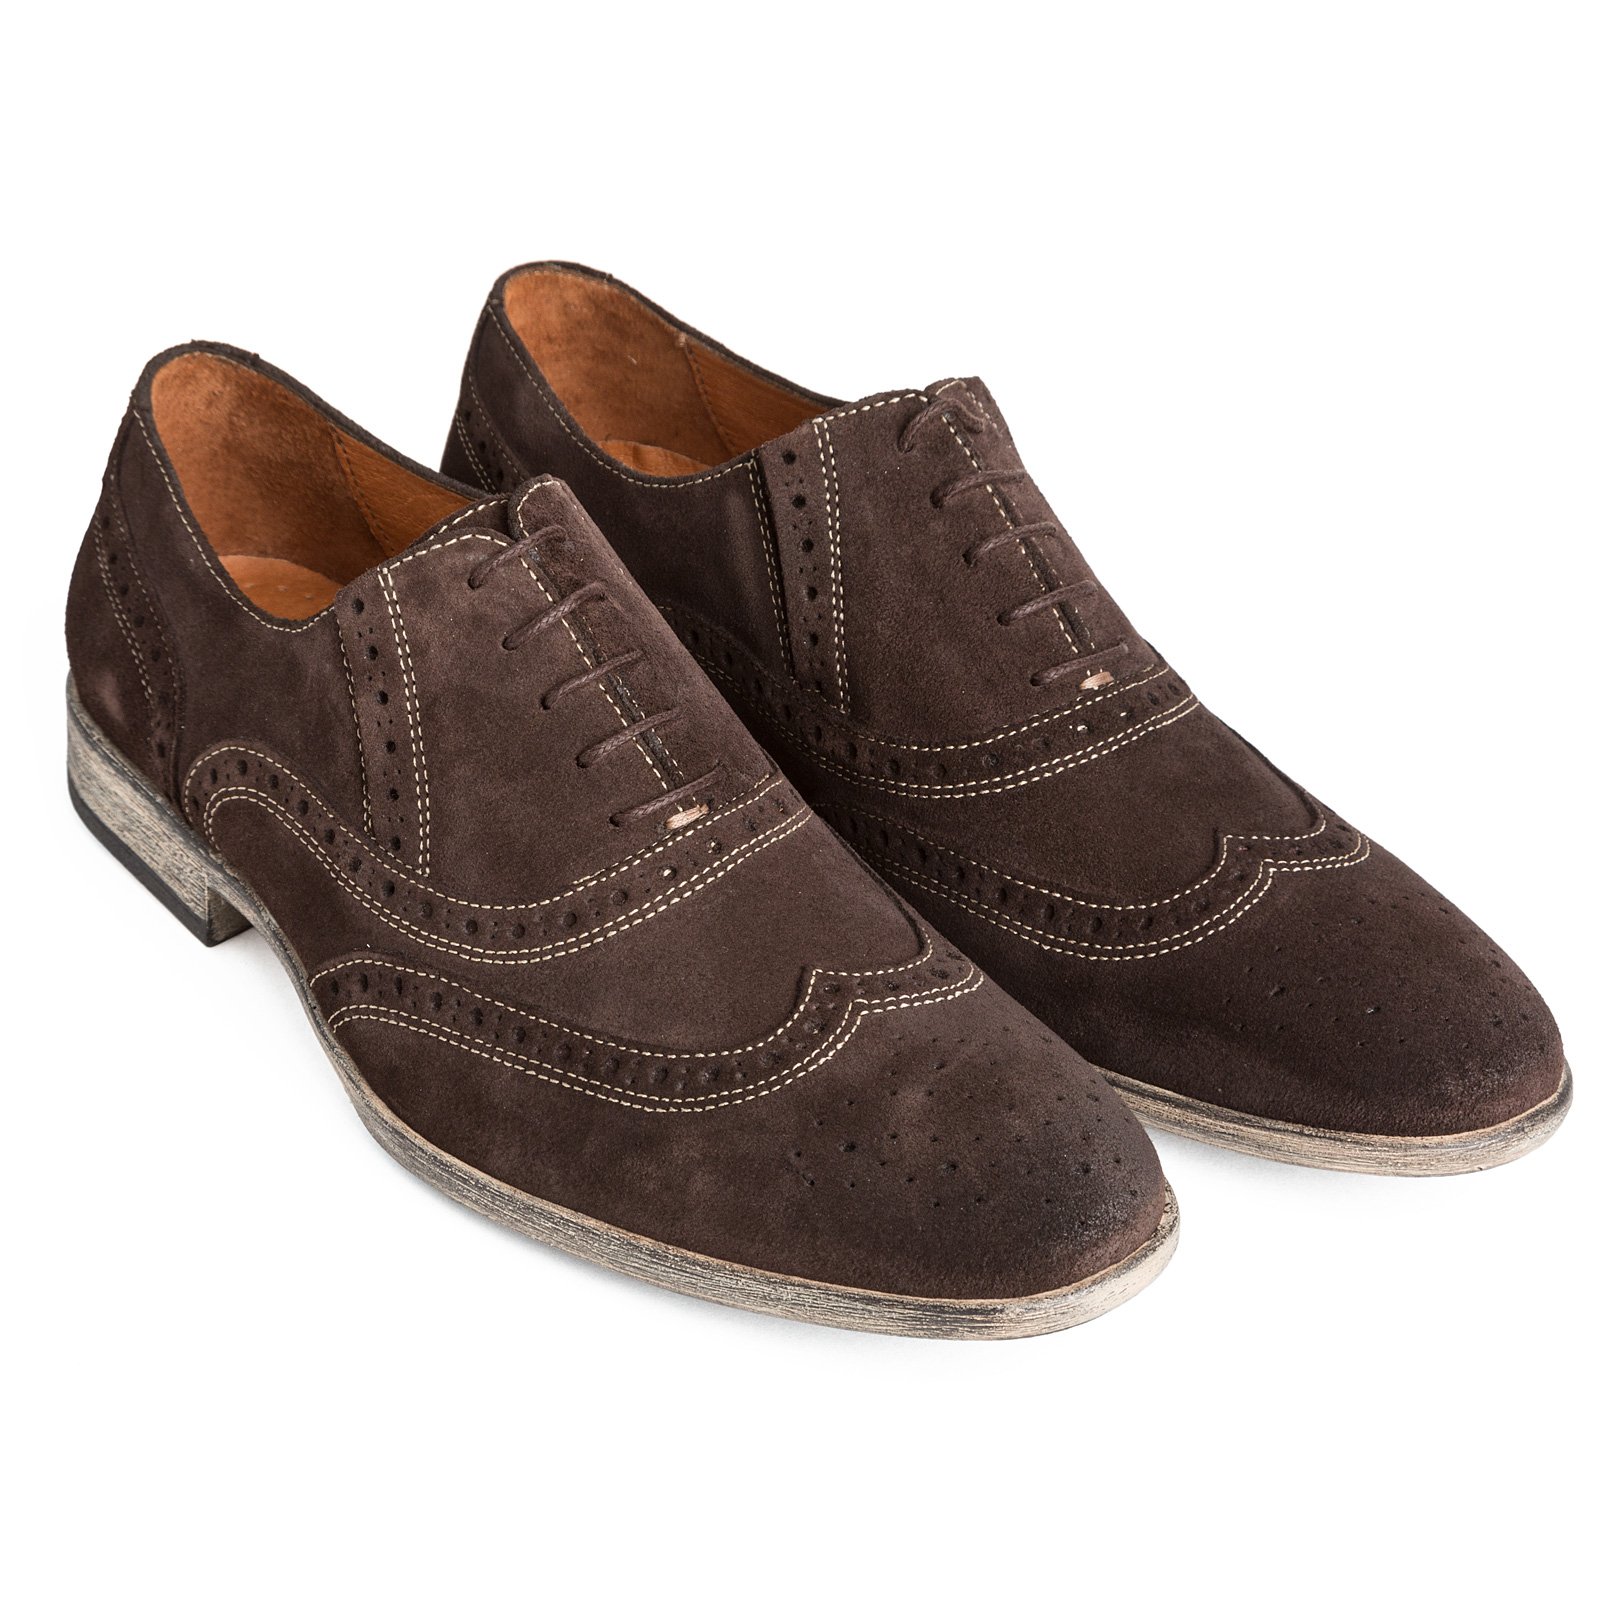 Suede Oxford Brogue Lace Up - BRANDO 2014AW-C3 : Shoes & Boots-Dress ...